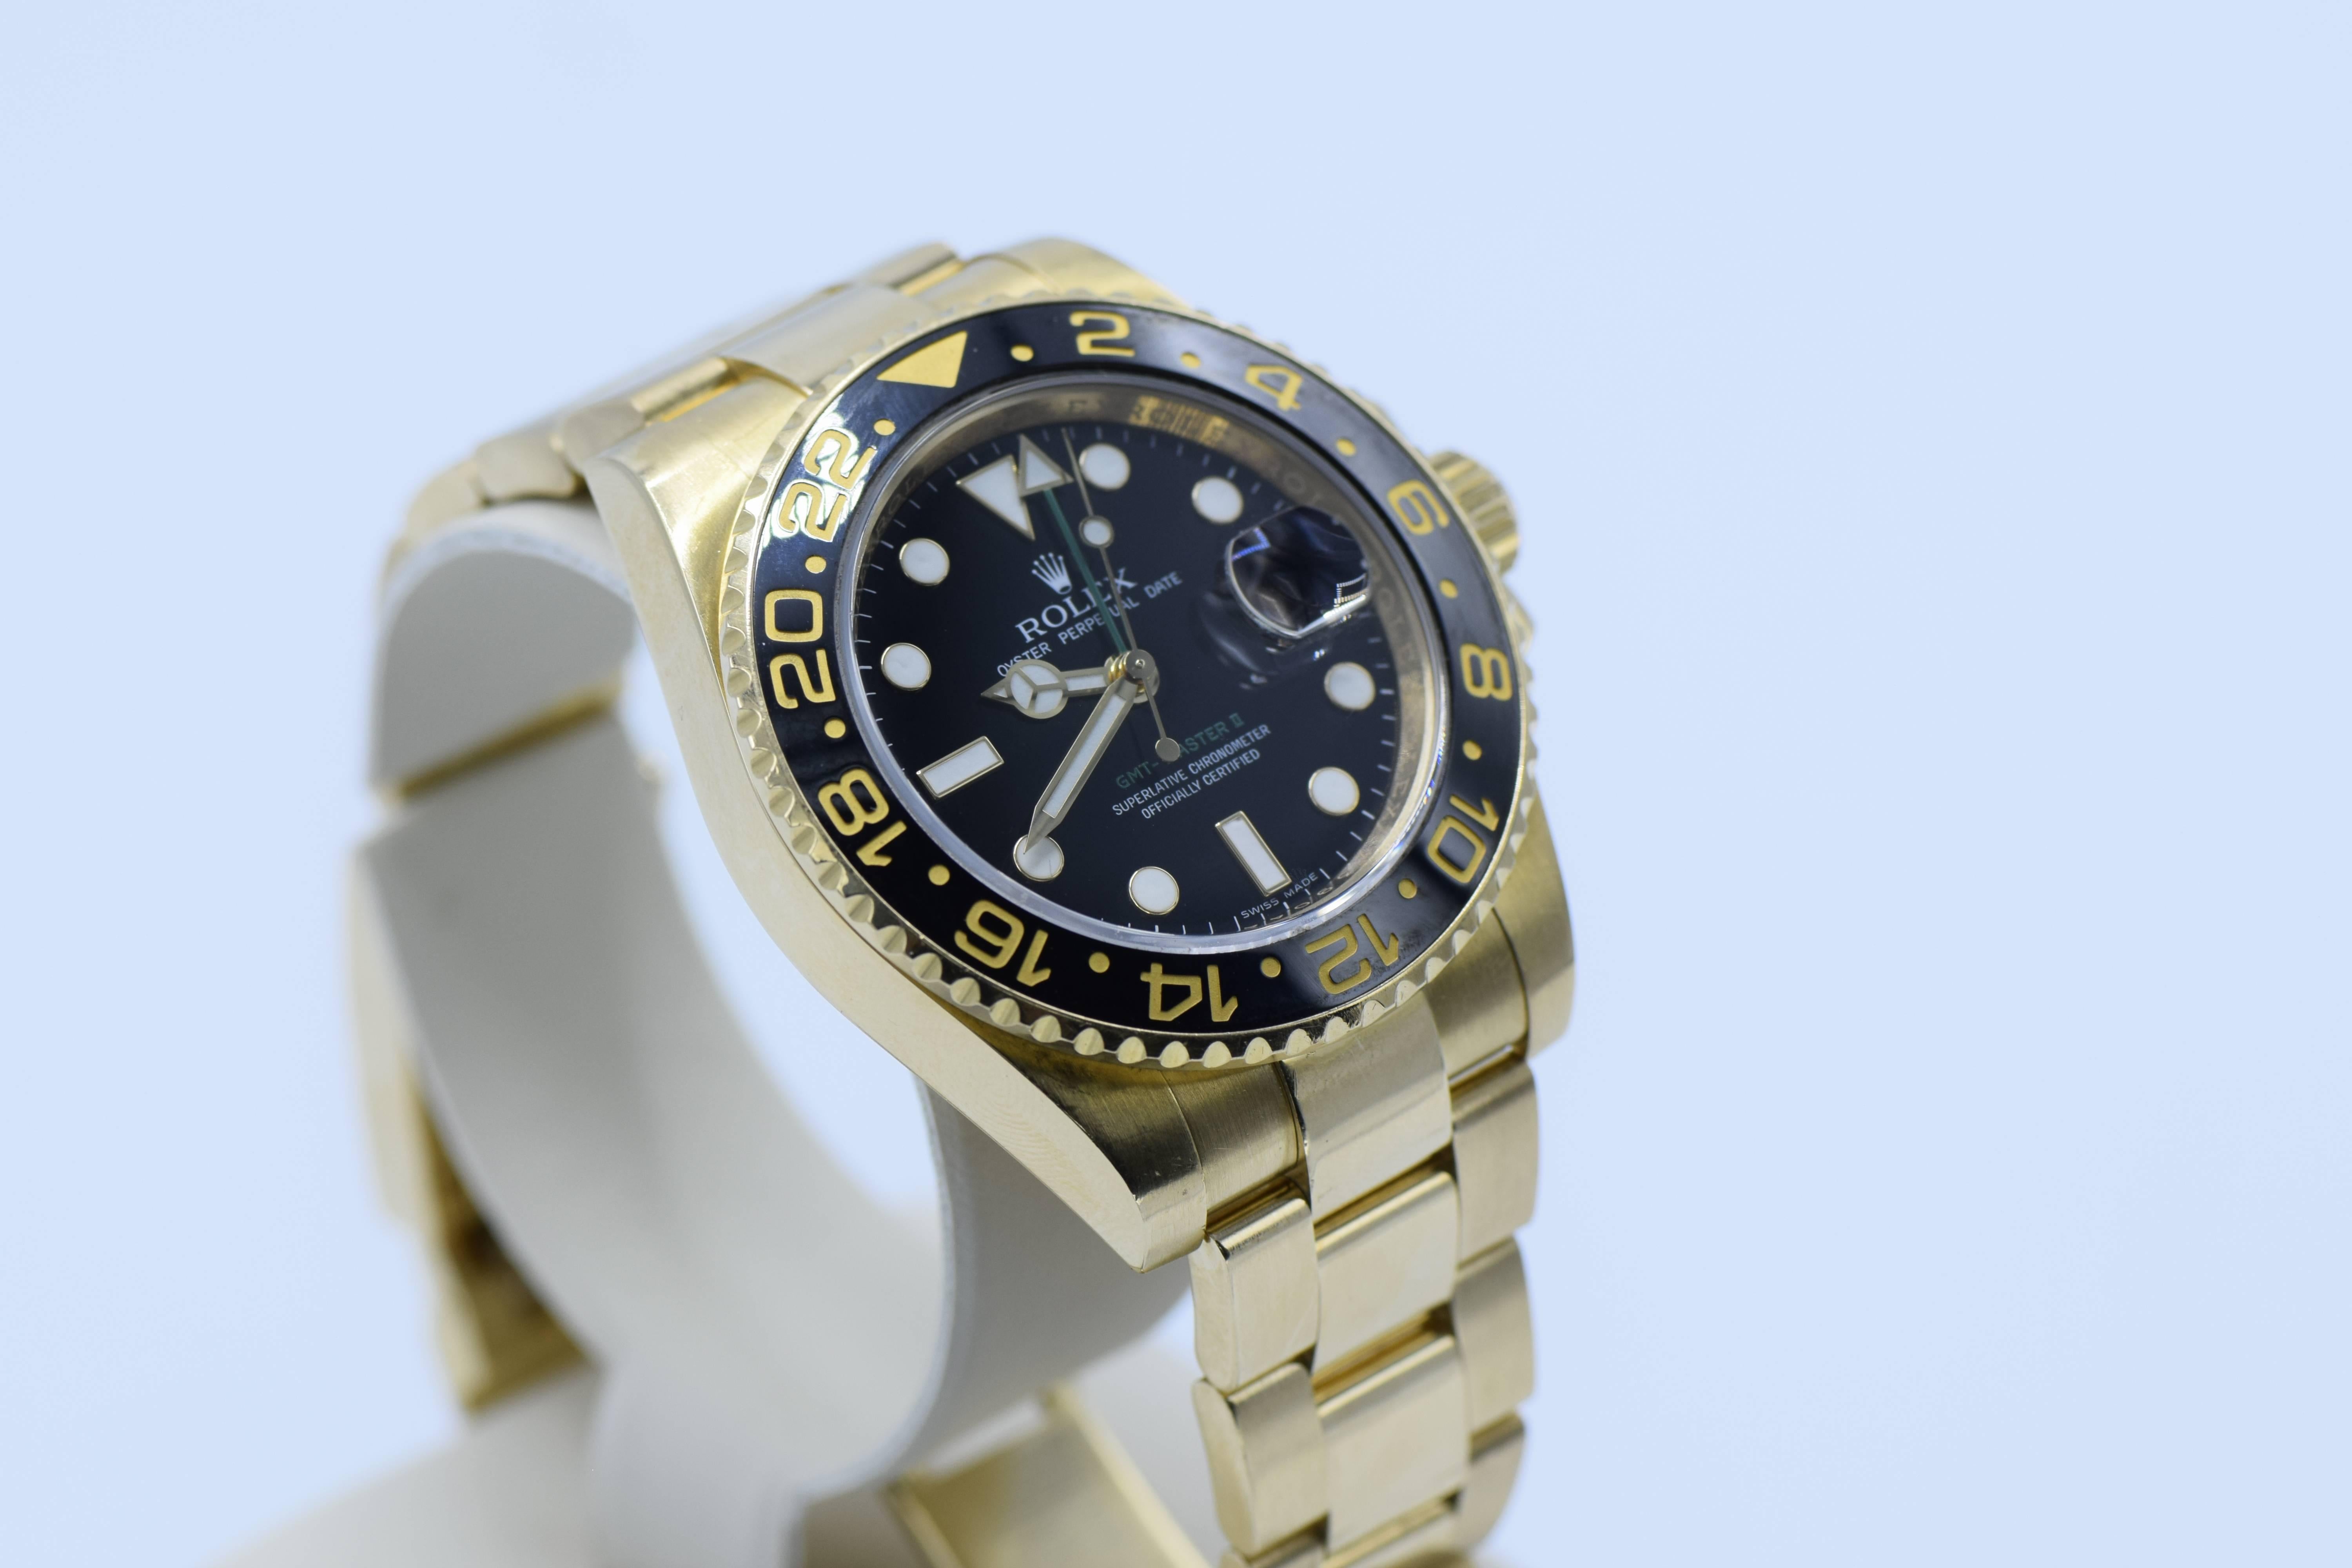 Certificate
2 Extra links 

Black Dial with Luminescent Hour Markers, Sweep Second Hand, GMT 2nd Time Zone Hand, Date Indicator
GMT 24-Hour Rotating Black Ceramic Bezel, Quickset Movement, and Crystal
Matching New Style 18K Yellow Gold Rolex